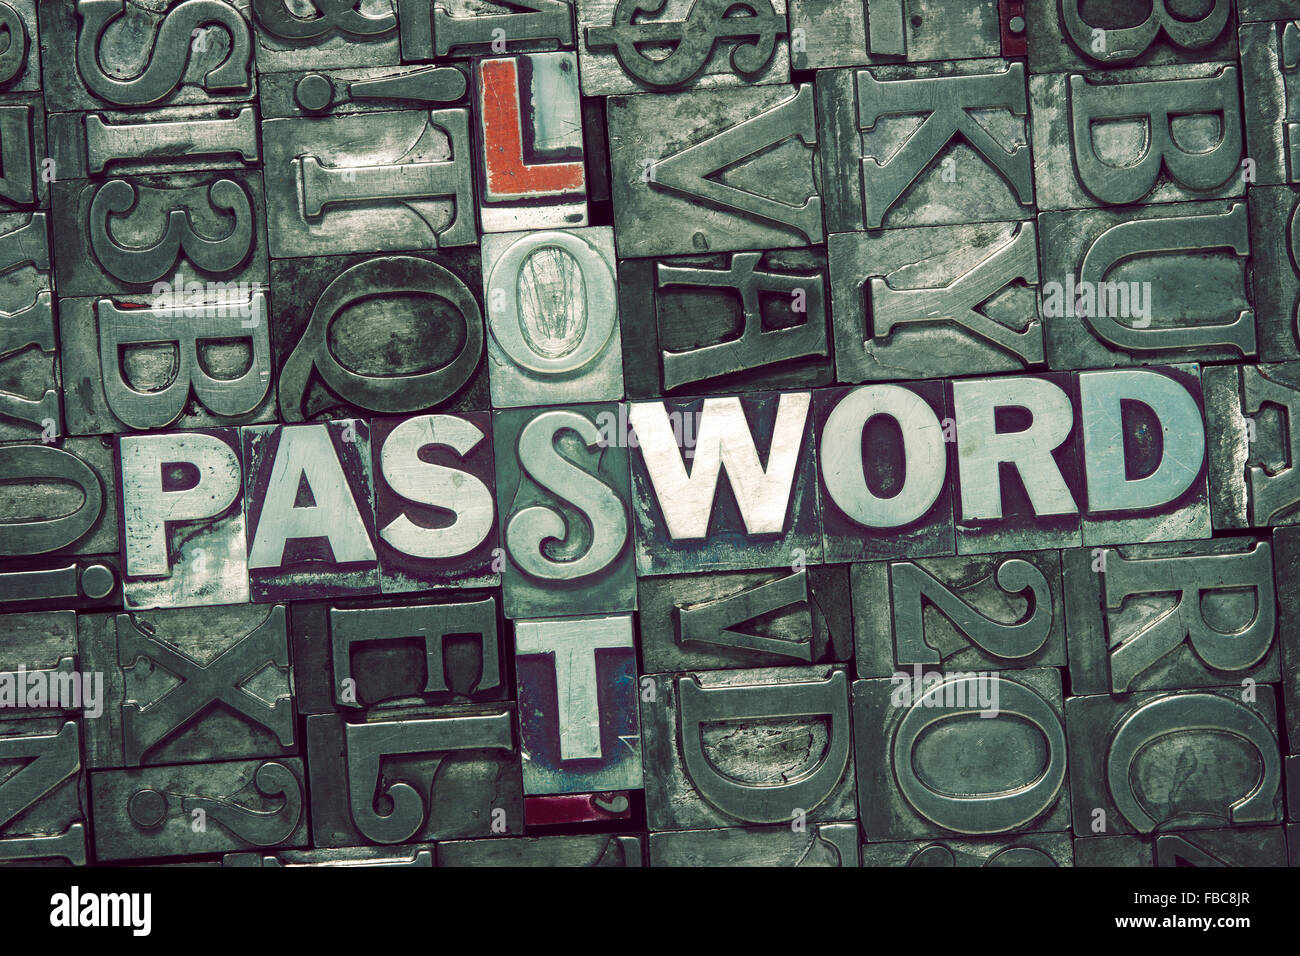 lost password crossword concept made from metallic letterpress blocks on letters background Stock Photo